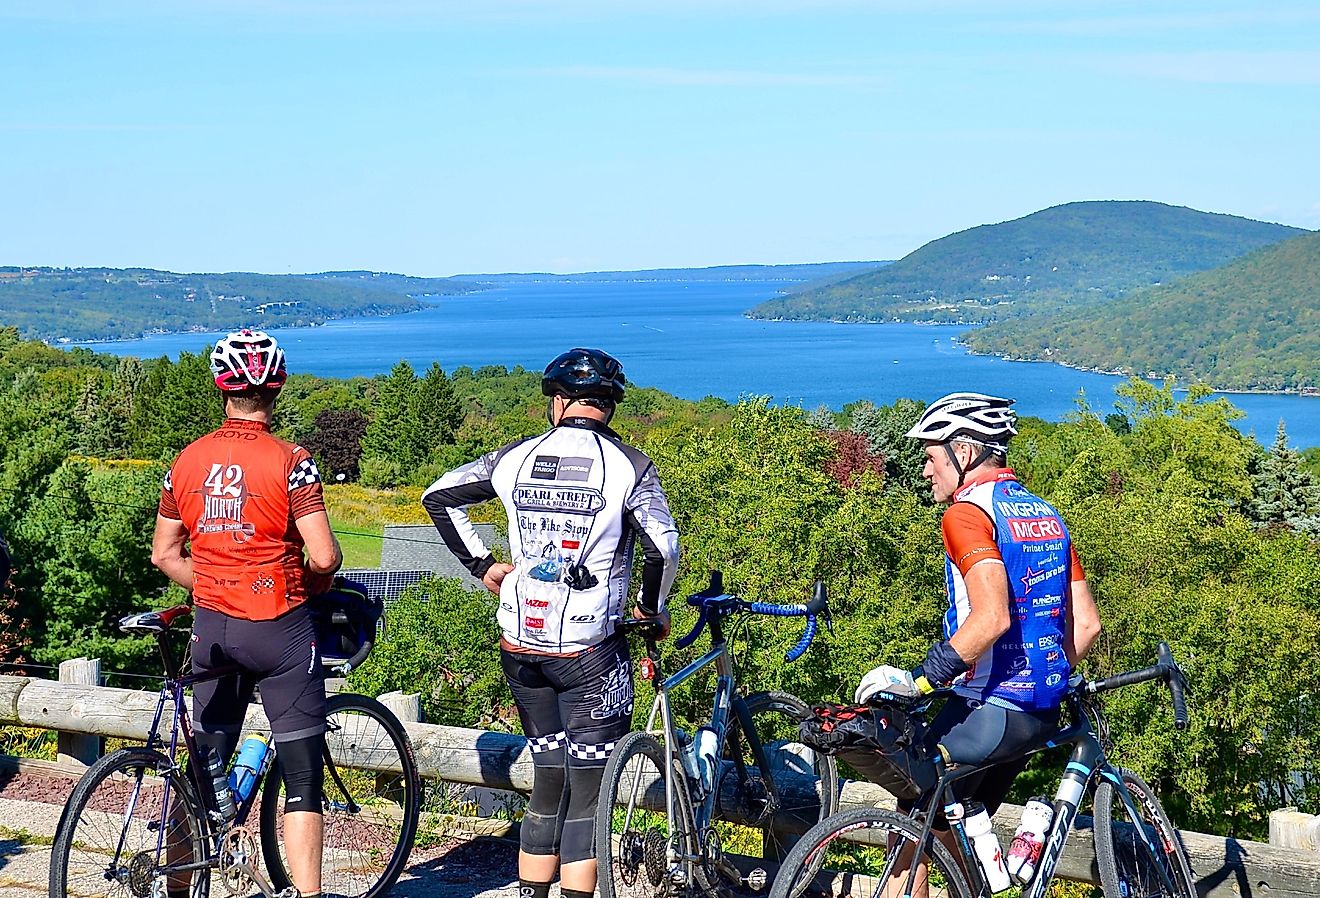 Bicyclists stop on route around Canandaigua Lake, New York with mountains in the background.